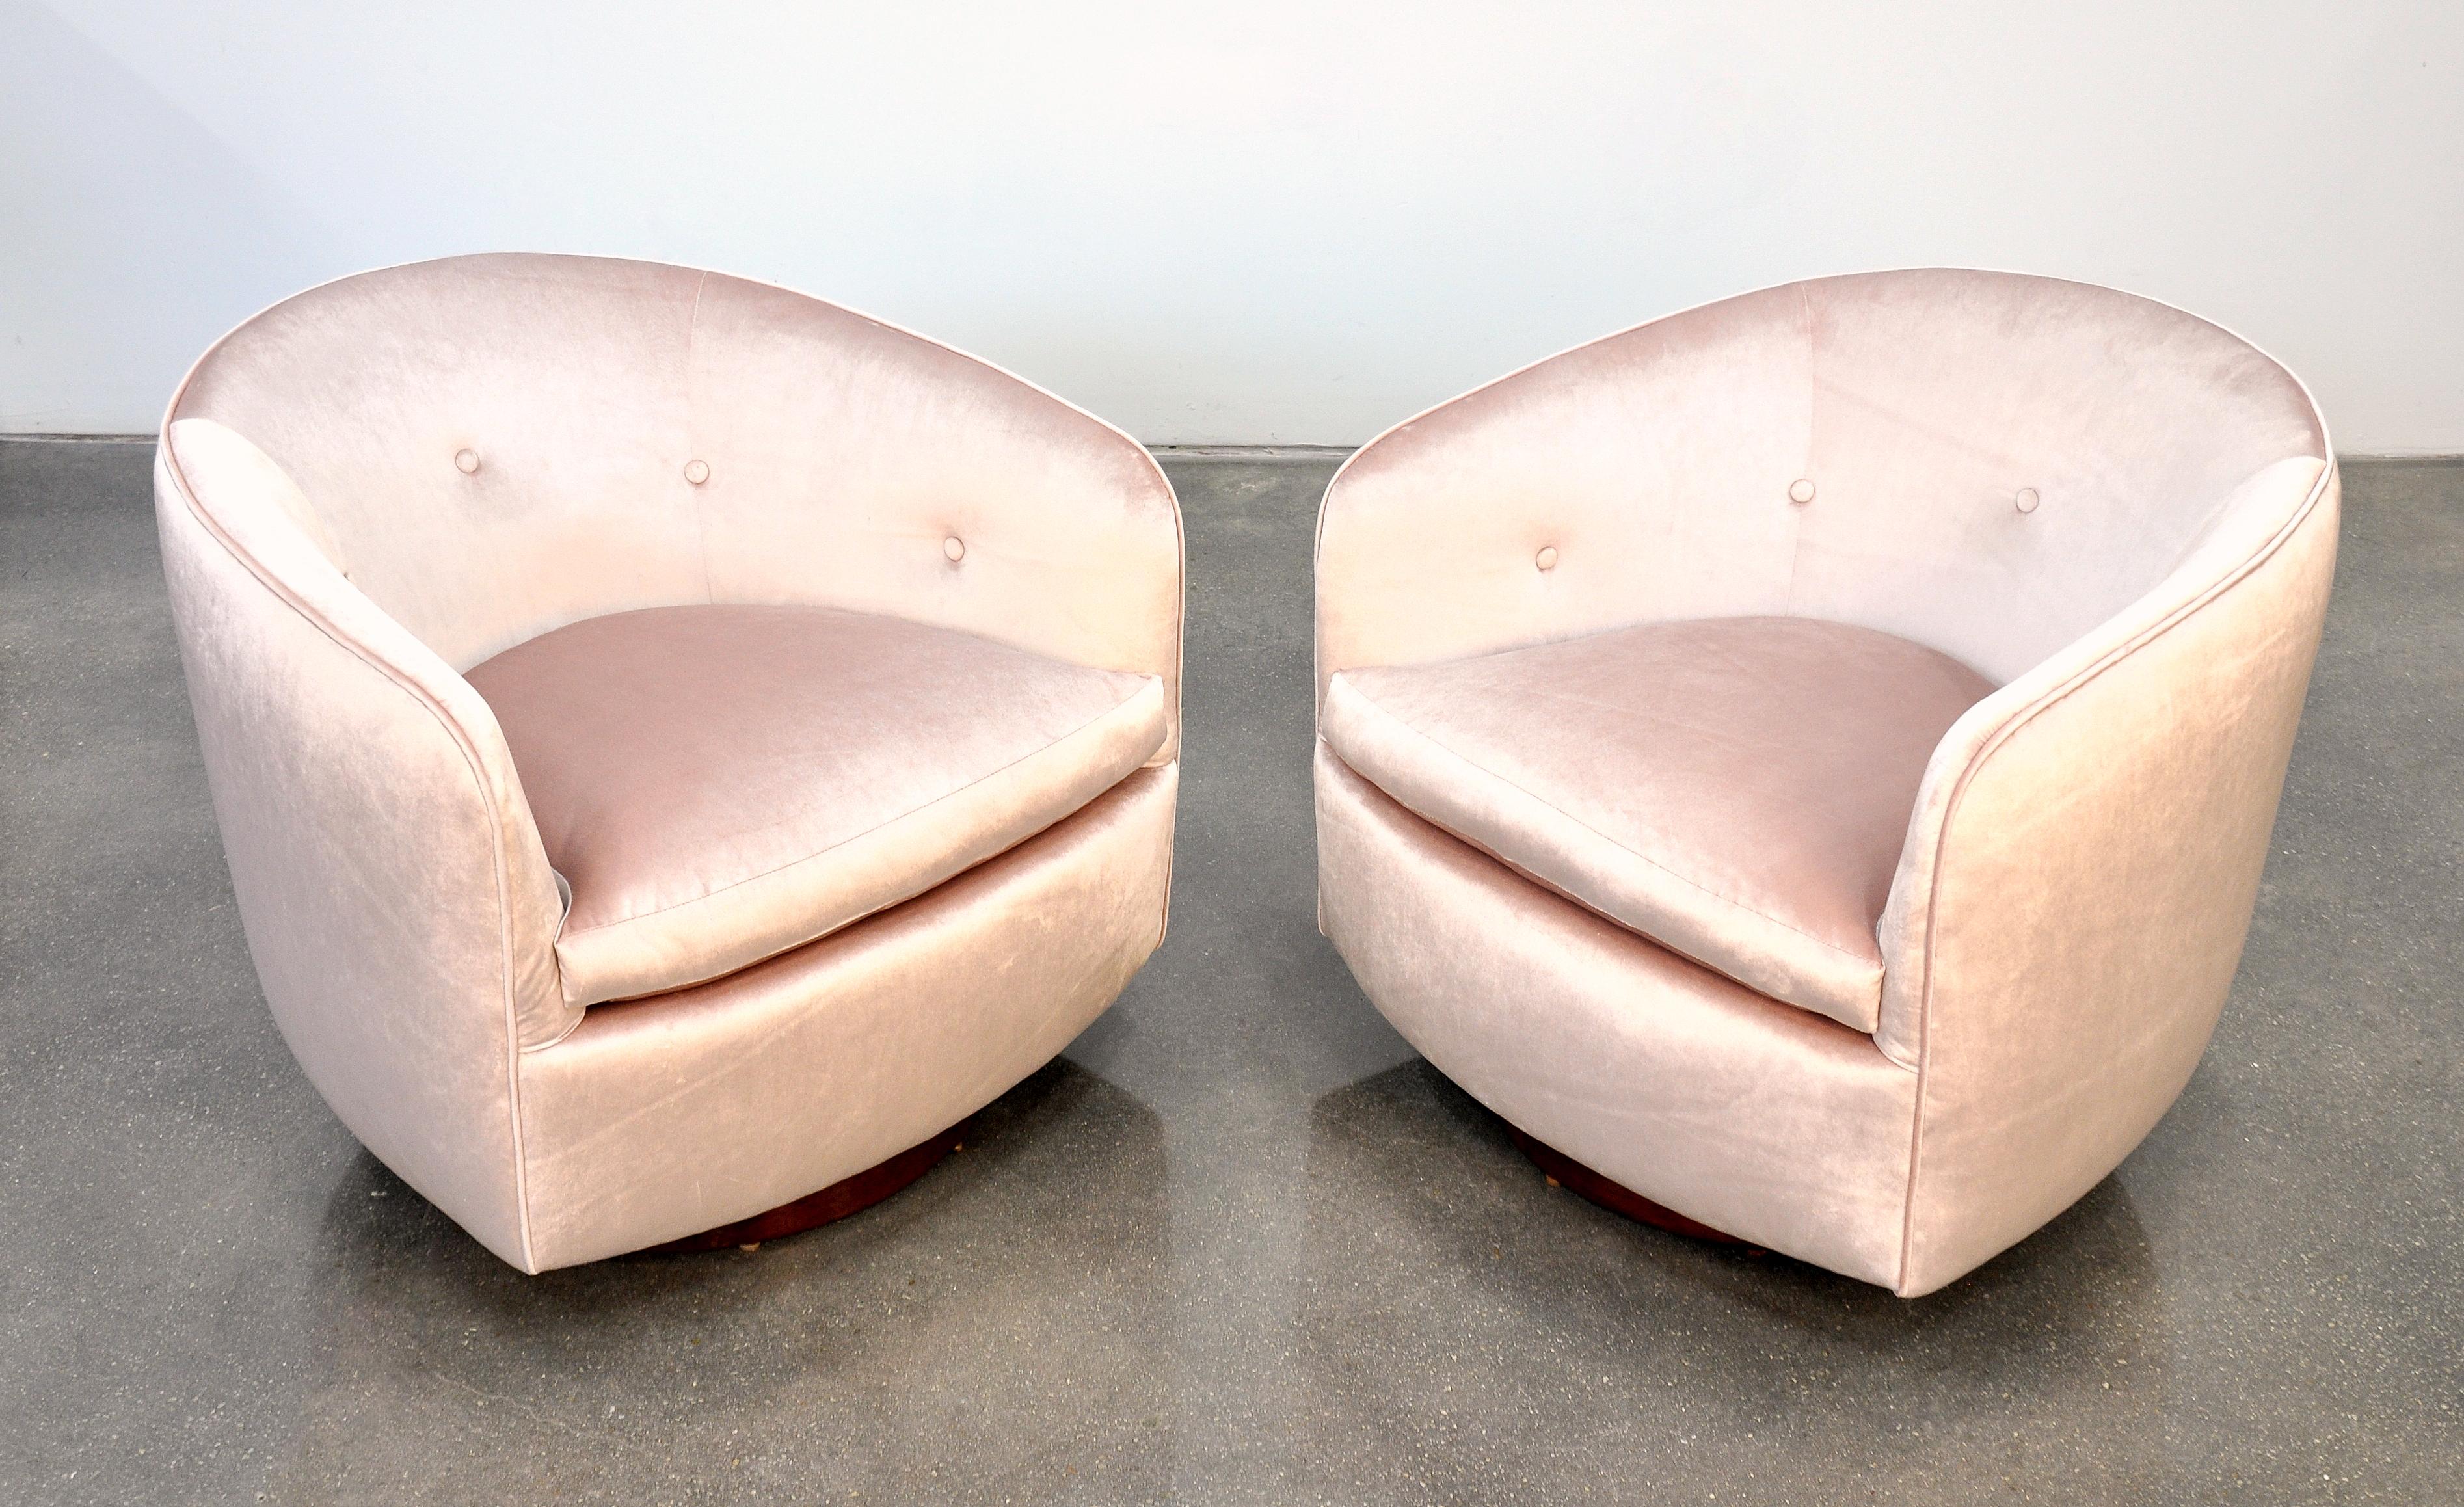 A fabulous pair of Mid-Century Modern tufted barrel back club chairs, designed by Milo Baughman for Thayer Coggin, and dating from the 1960s. Fully restored and reupholstered in a light blush toned pastel rose velvet; featuring walnut bases with